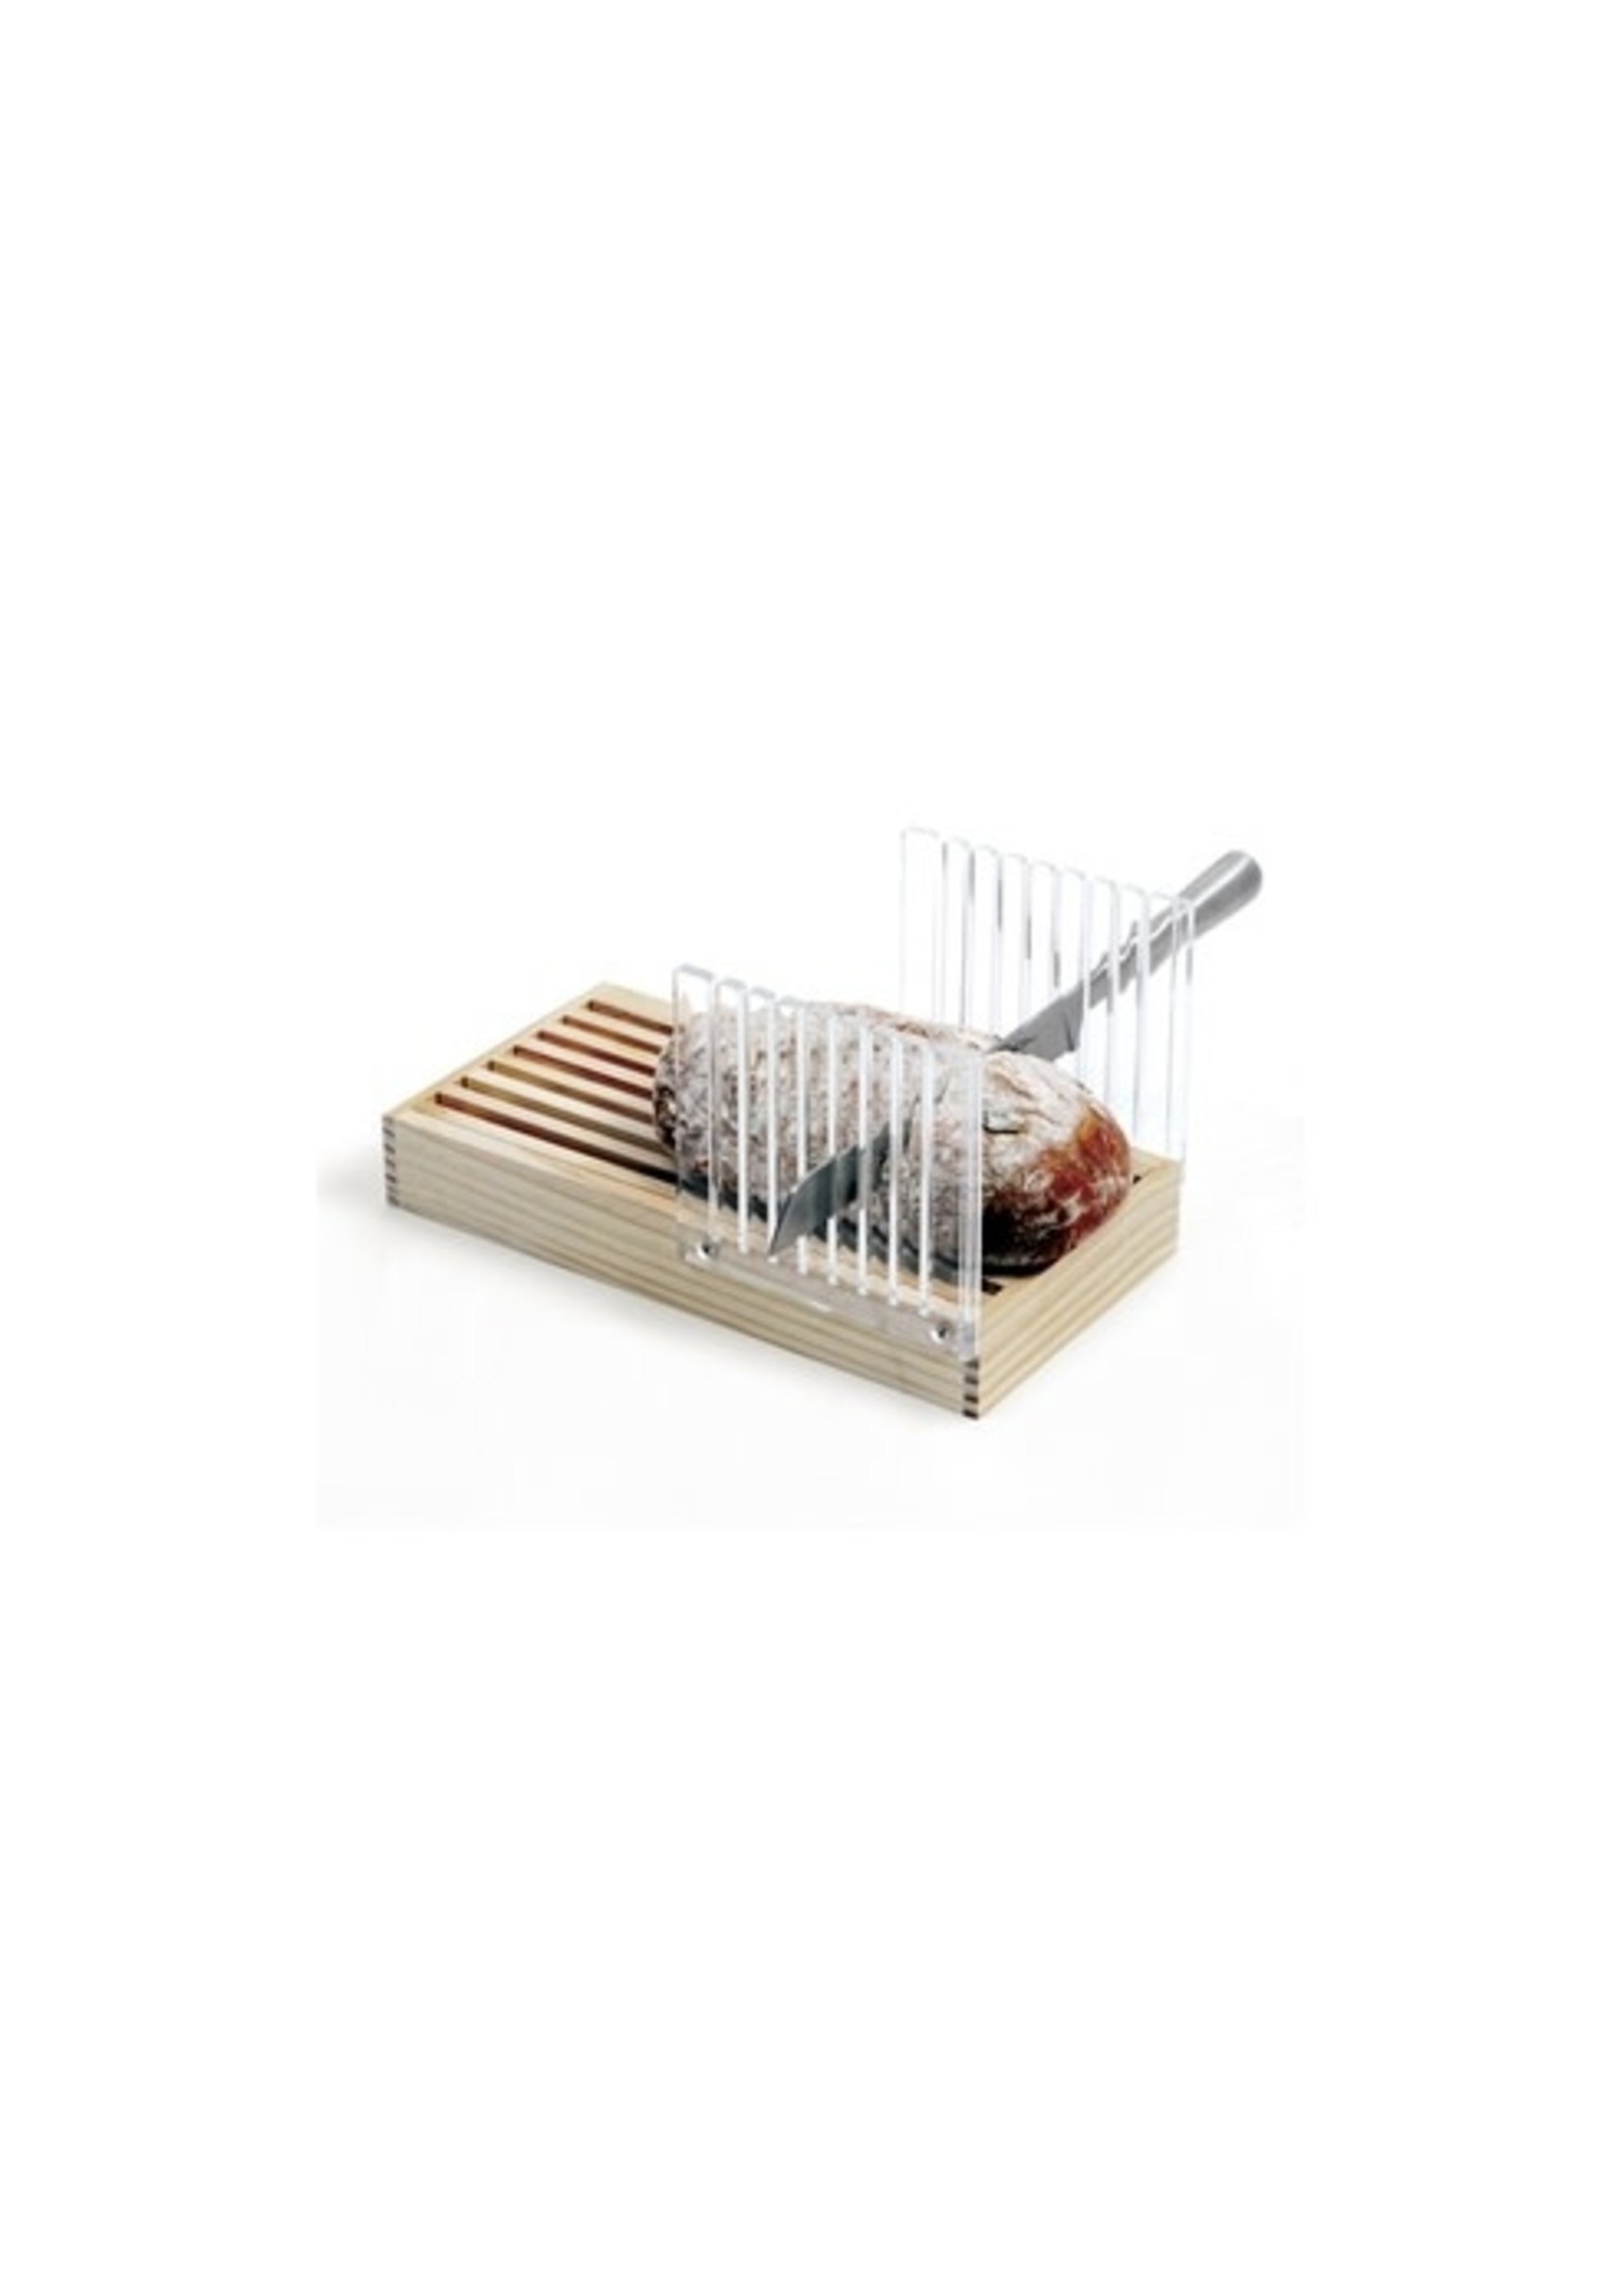 Norpro Bread Slicer w/ Crumb Catcher - The Kitchen Table